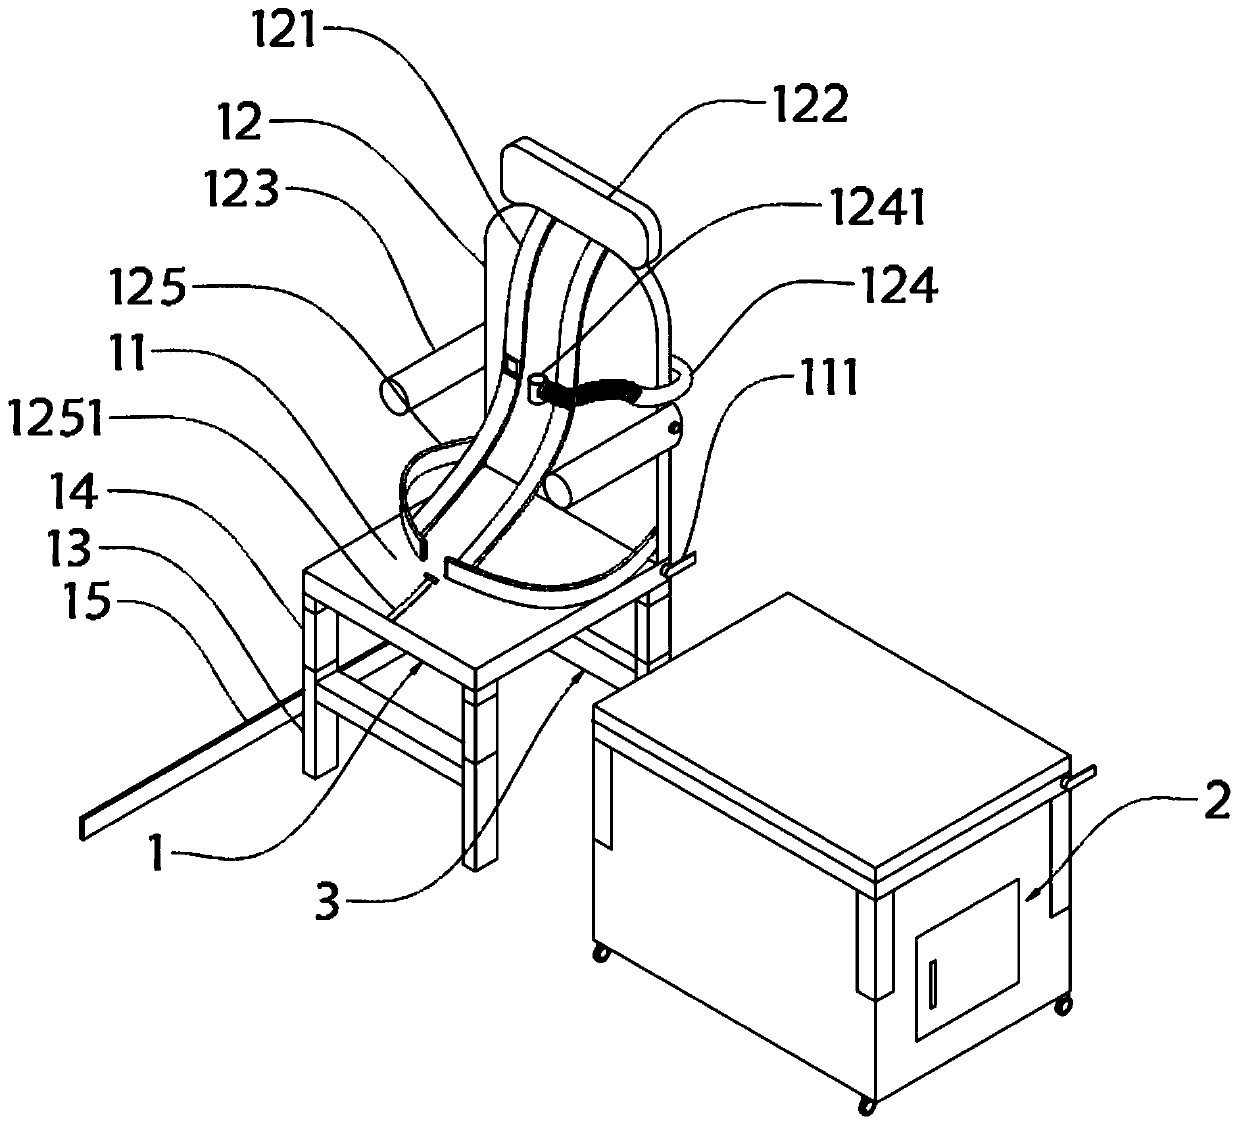 Multifunctional primary-secondary chair for aerosol inhalation